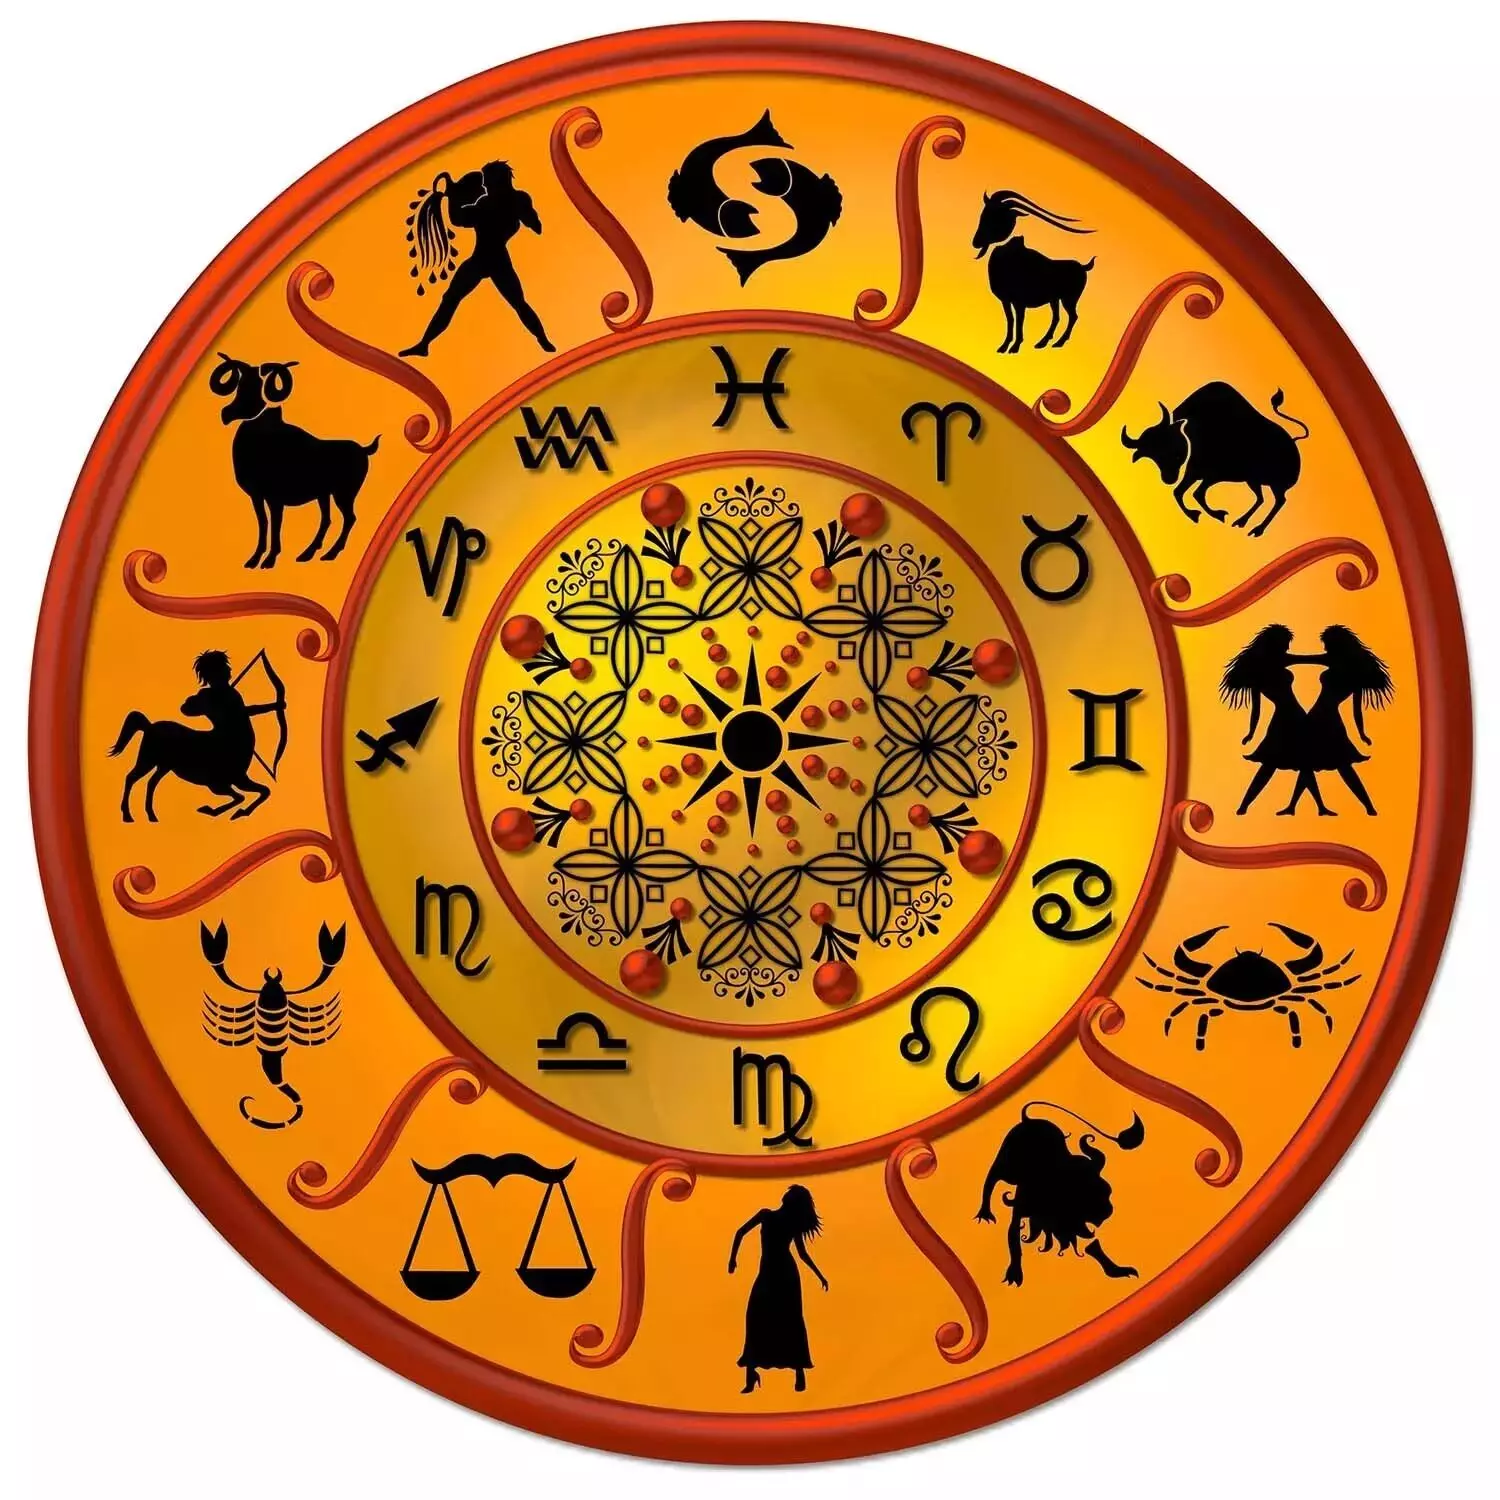 03 April  – Know your todays horoscope